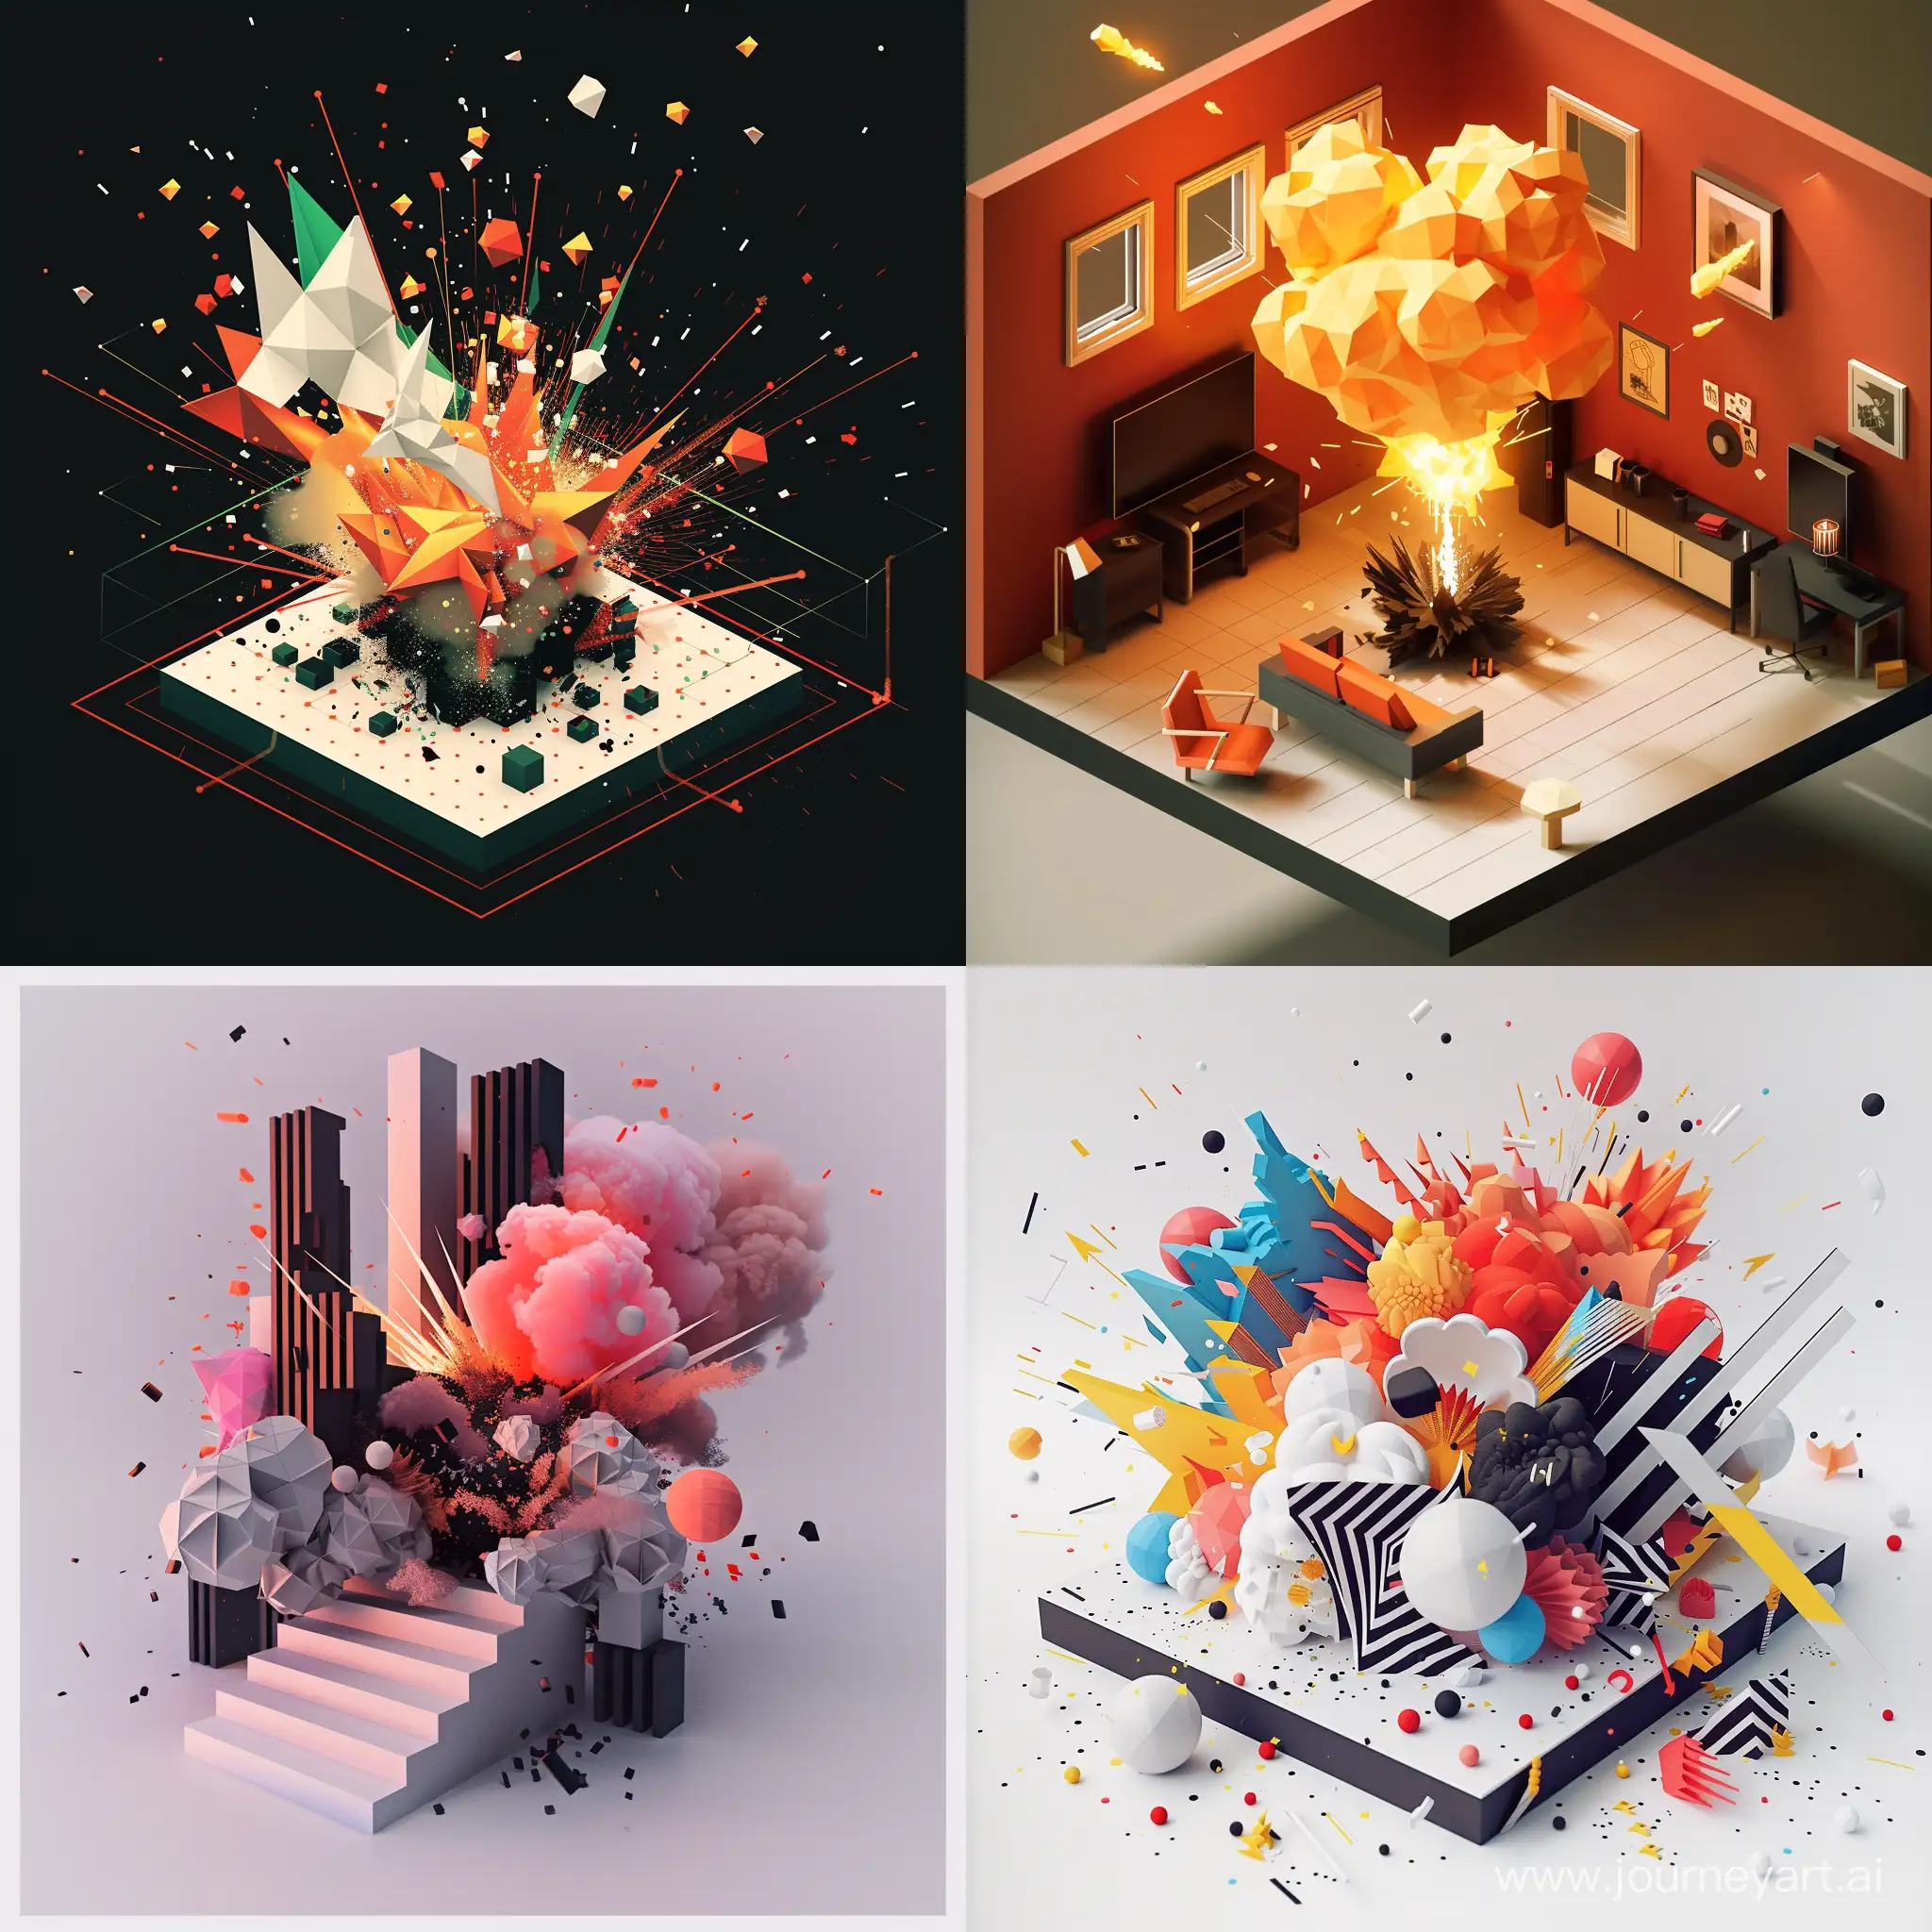 Dynamic-Retro-Noir-Explosion-in-Isometric-Origami-Style